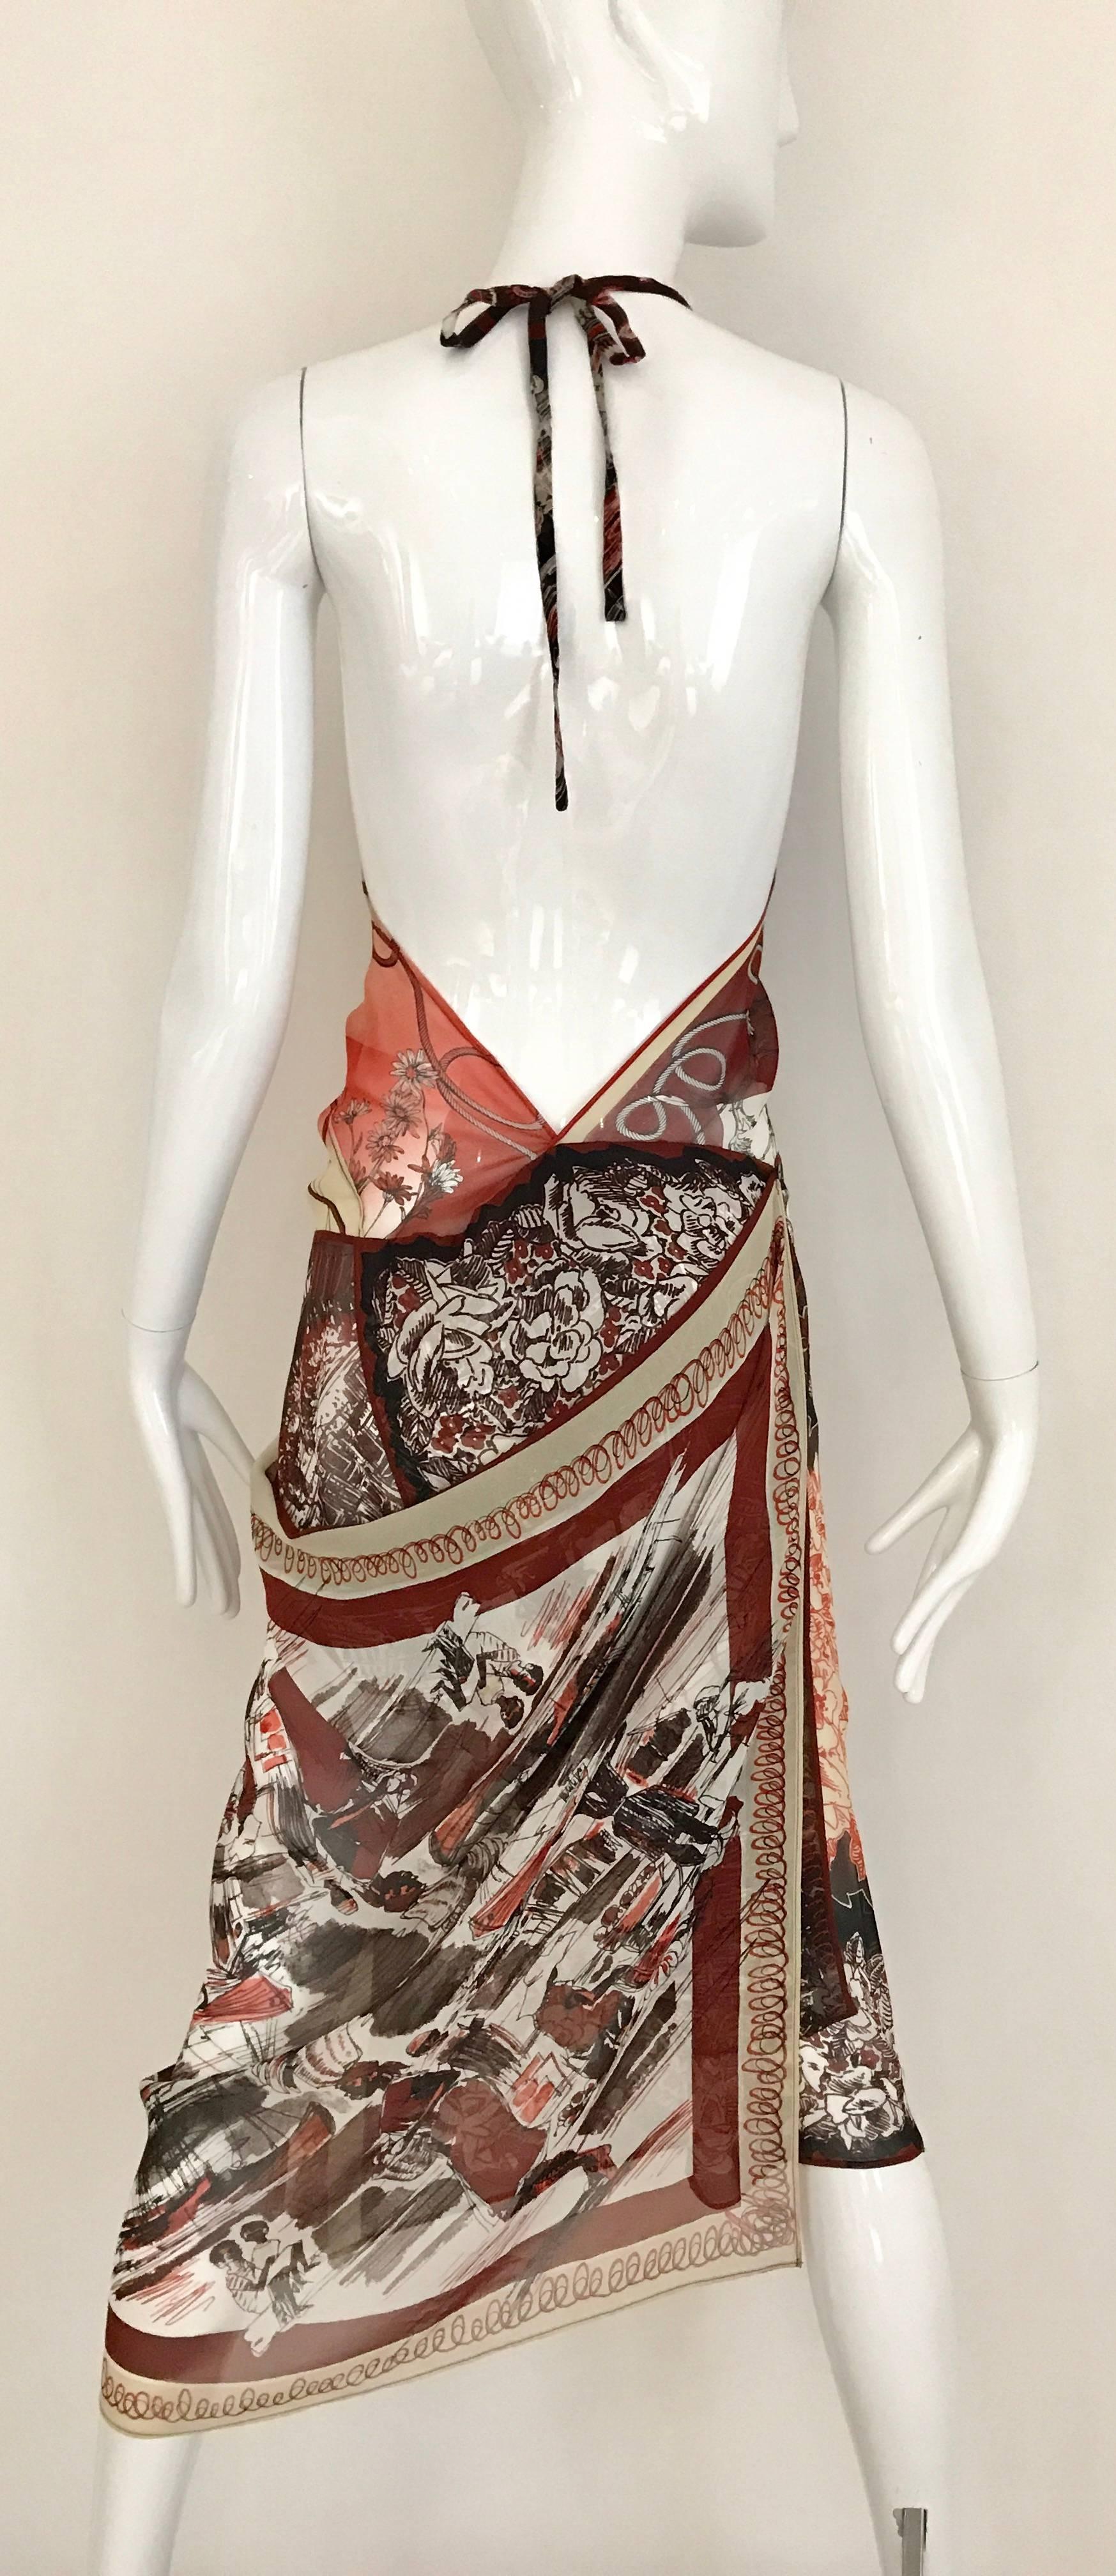 3 pcs vintage Jean Paul Gaultier creme, red, black and brown paisley print Halter Dress with Bra and cropped Jacket
Dress measurement: Bust 34 inch / Waist 30 inch / Hip 38 inch / 
Bra top fit size 32 - 34 inch
Jacket : Fit 40 bust 